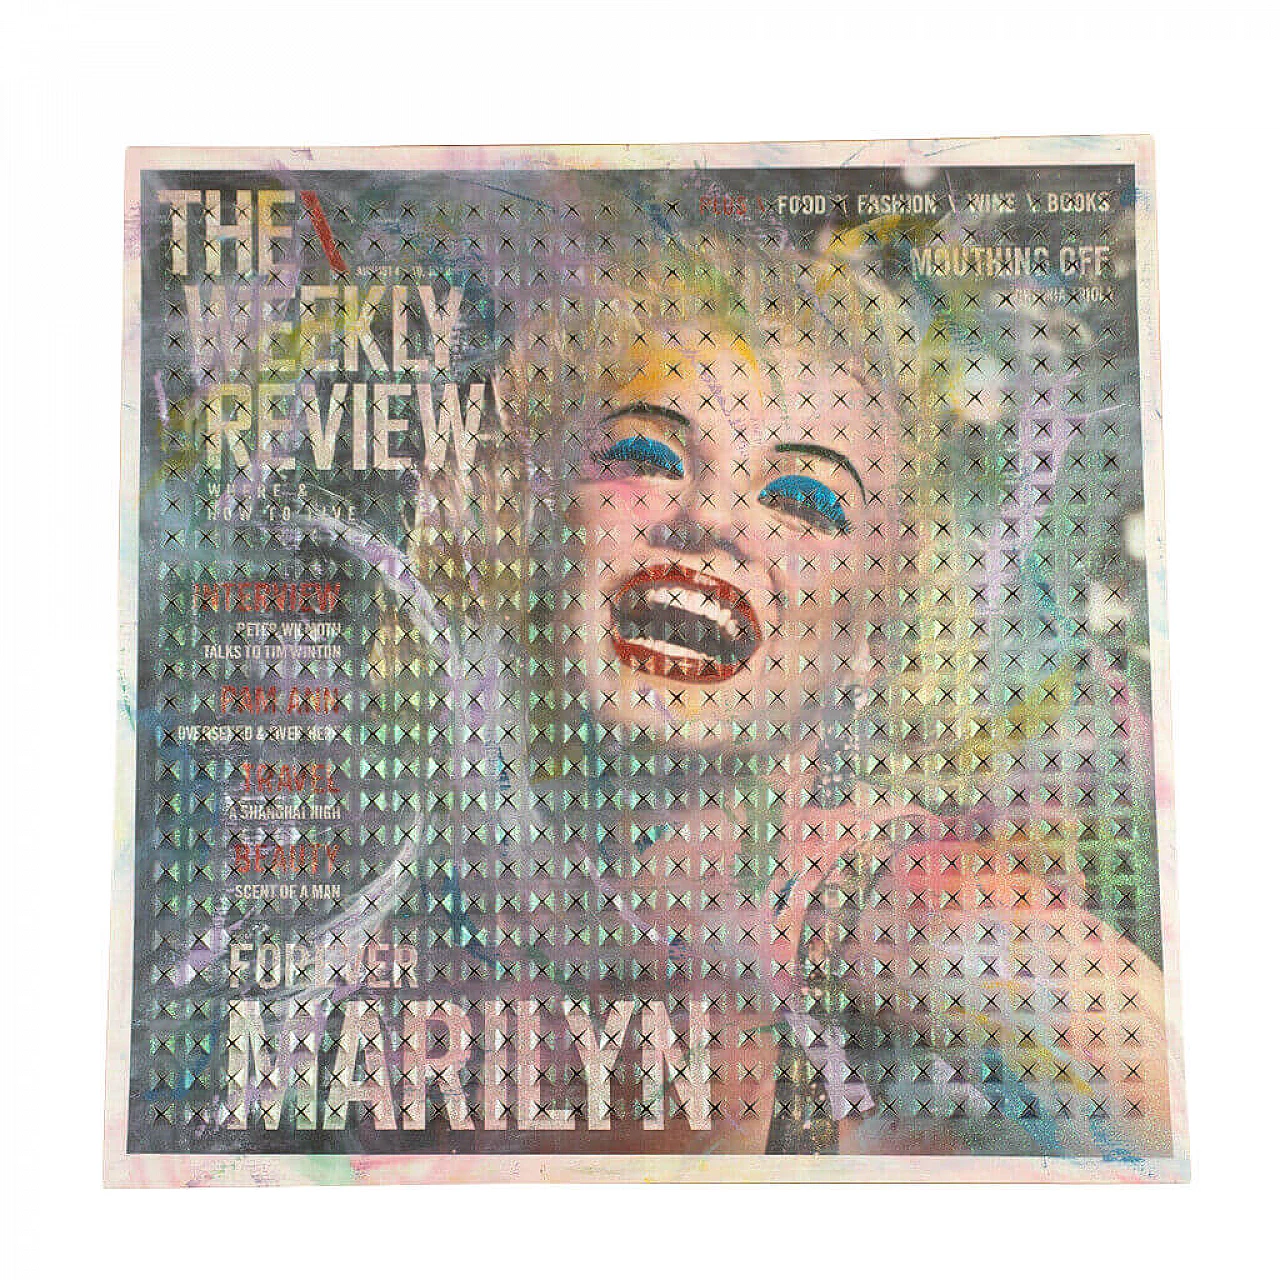 Painting The weekly review depicting Marilyn Monroe, 90s 1185009